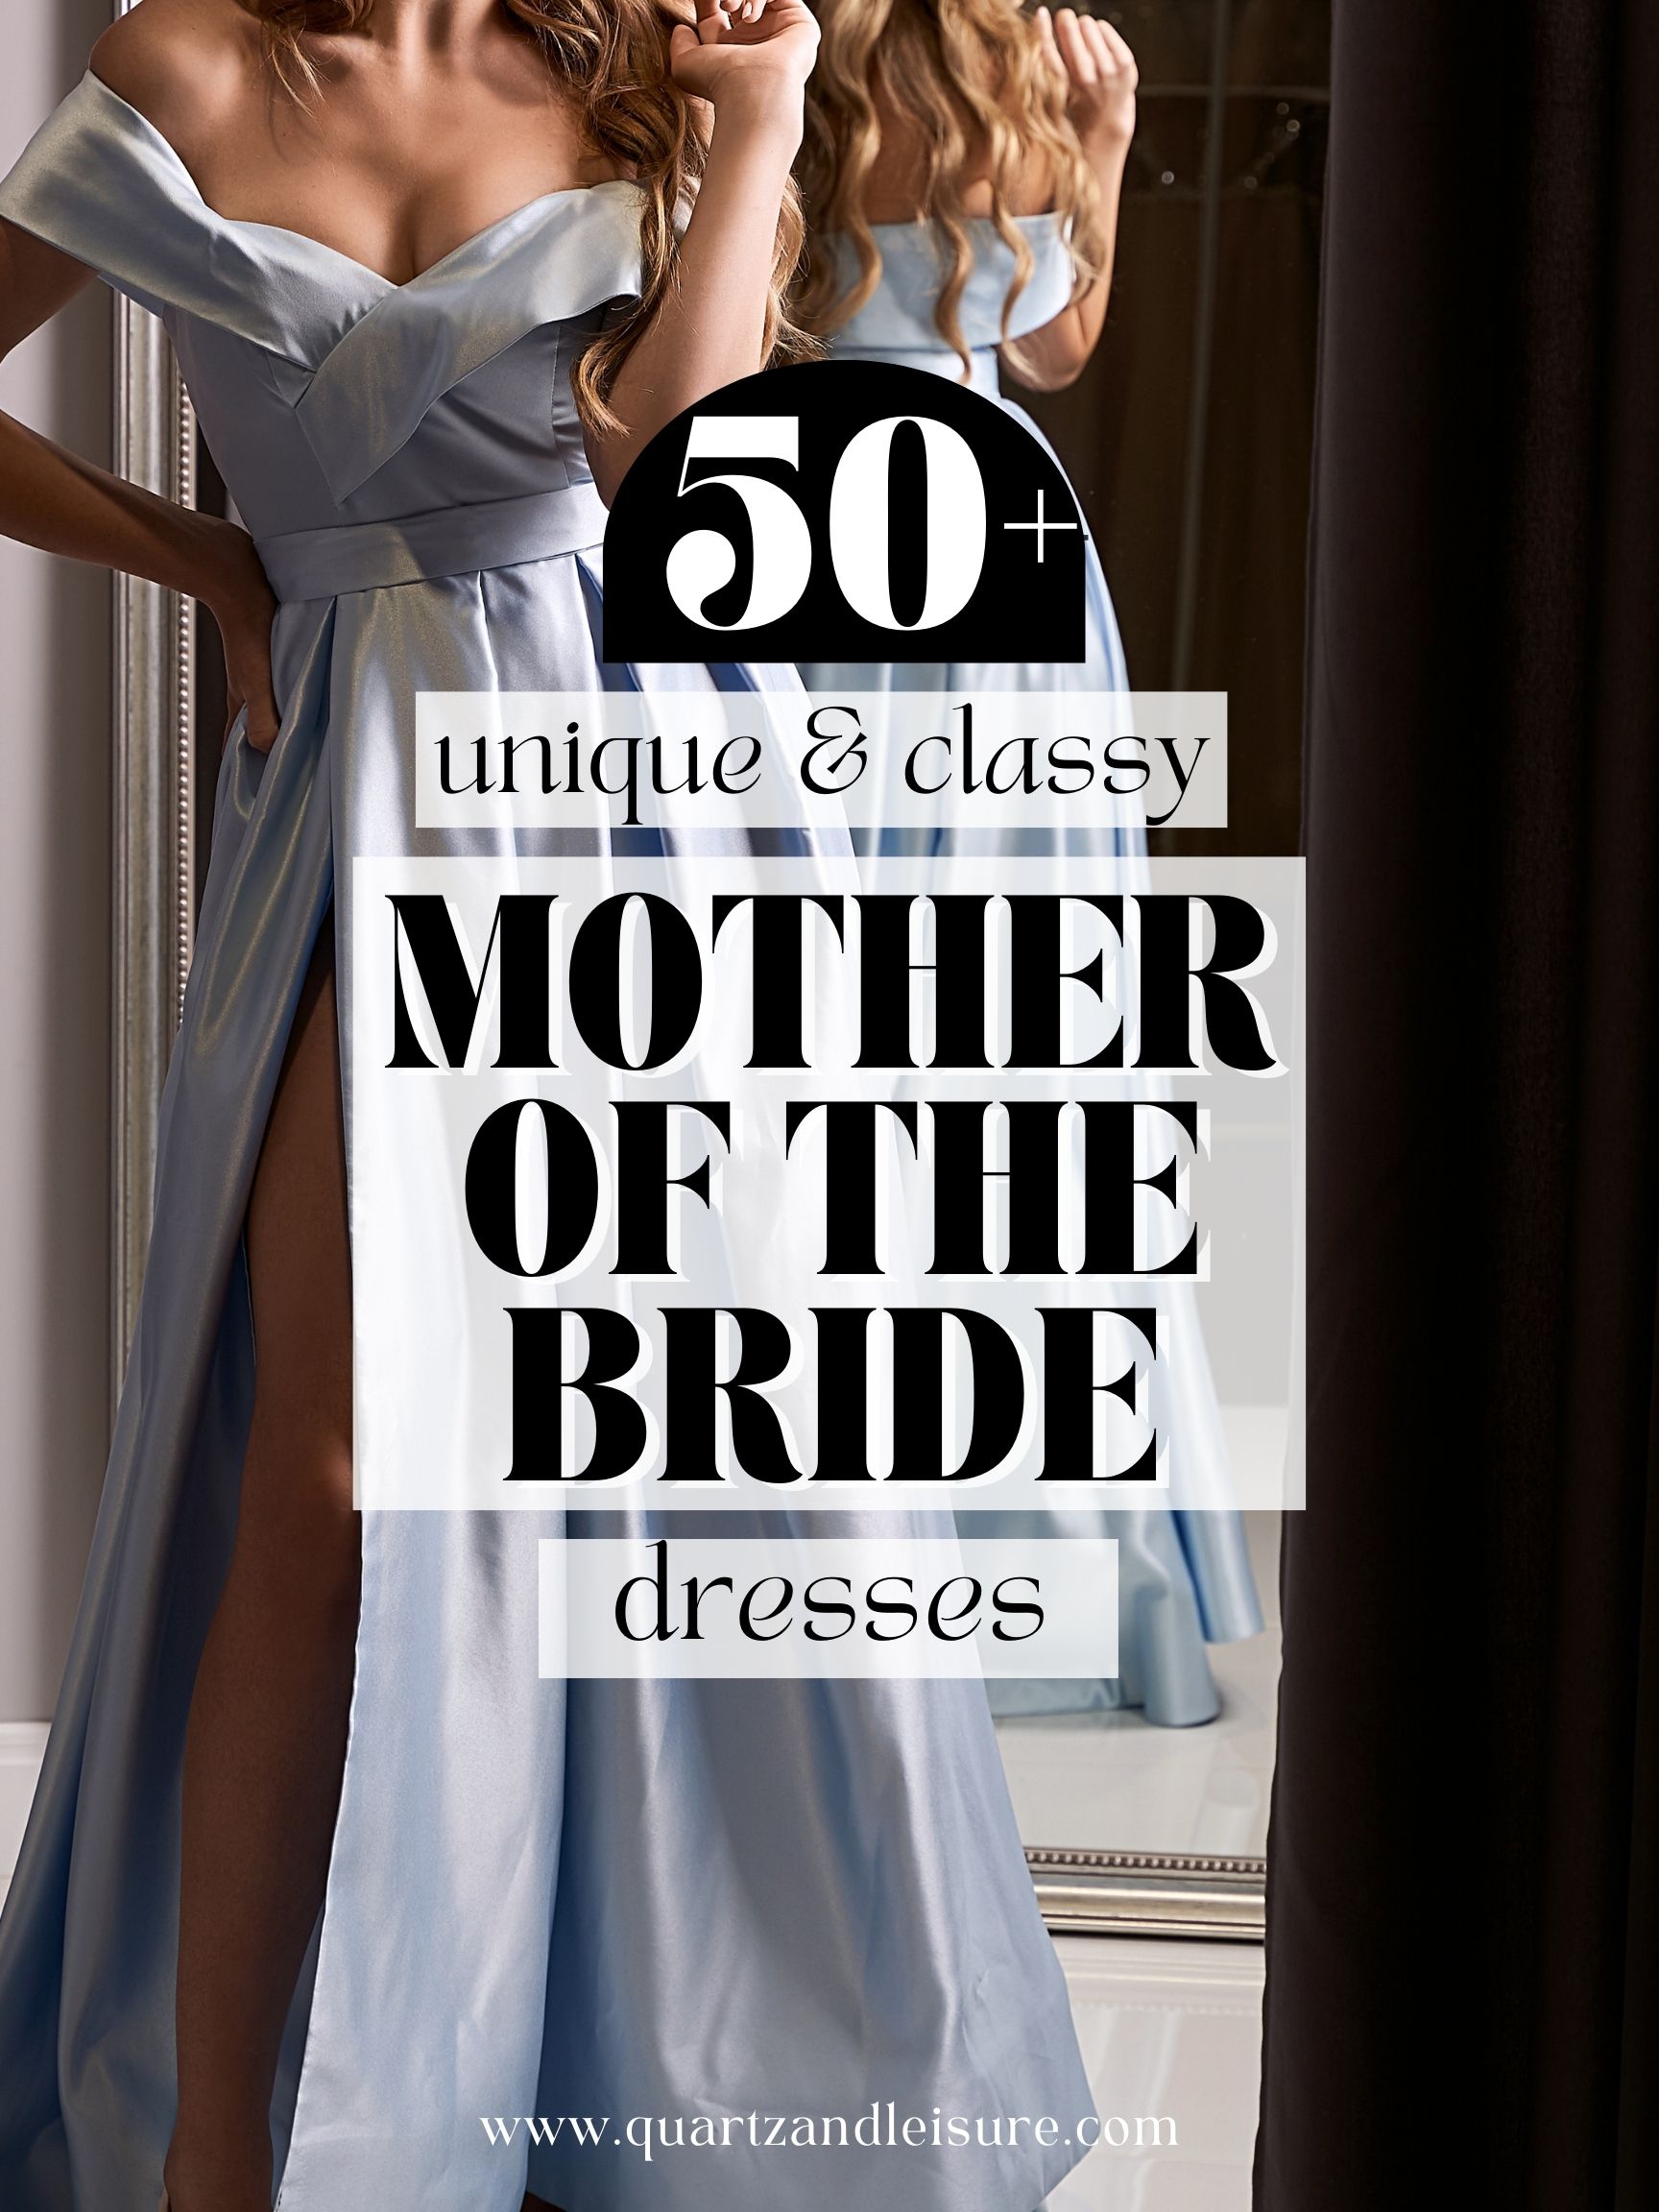 Unusual Mother of the Bride Dresses